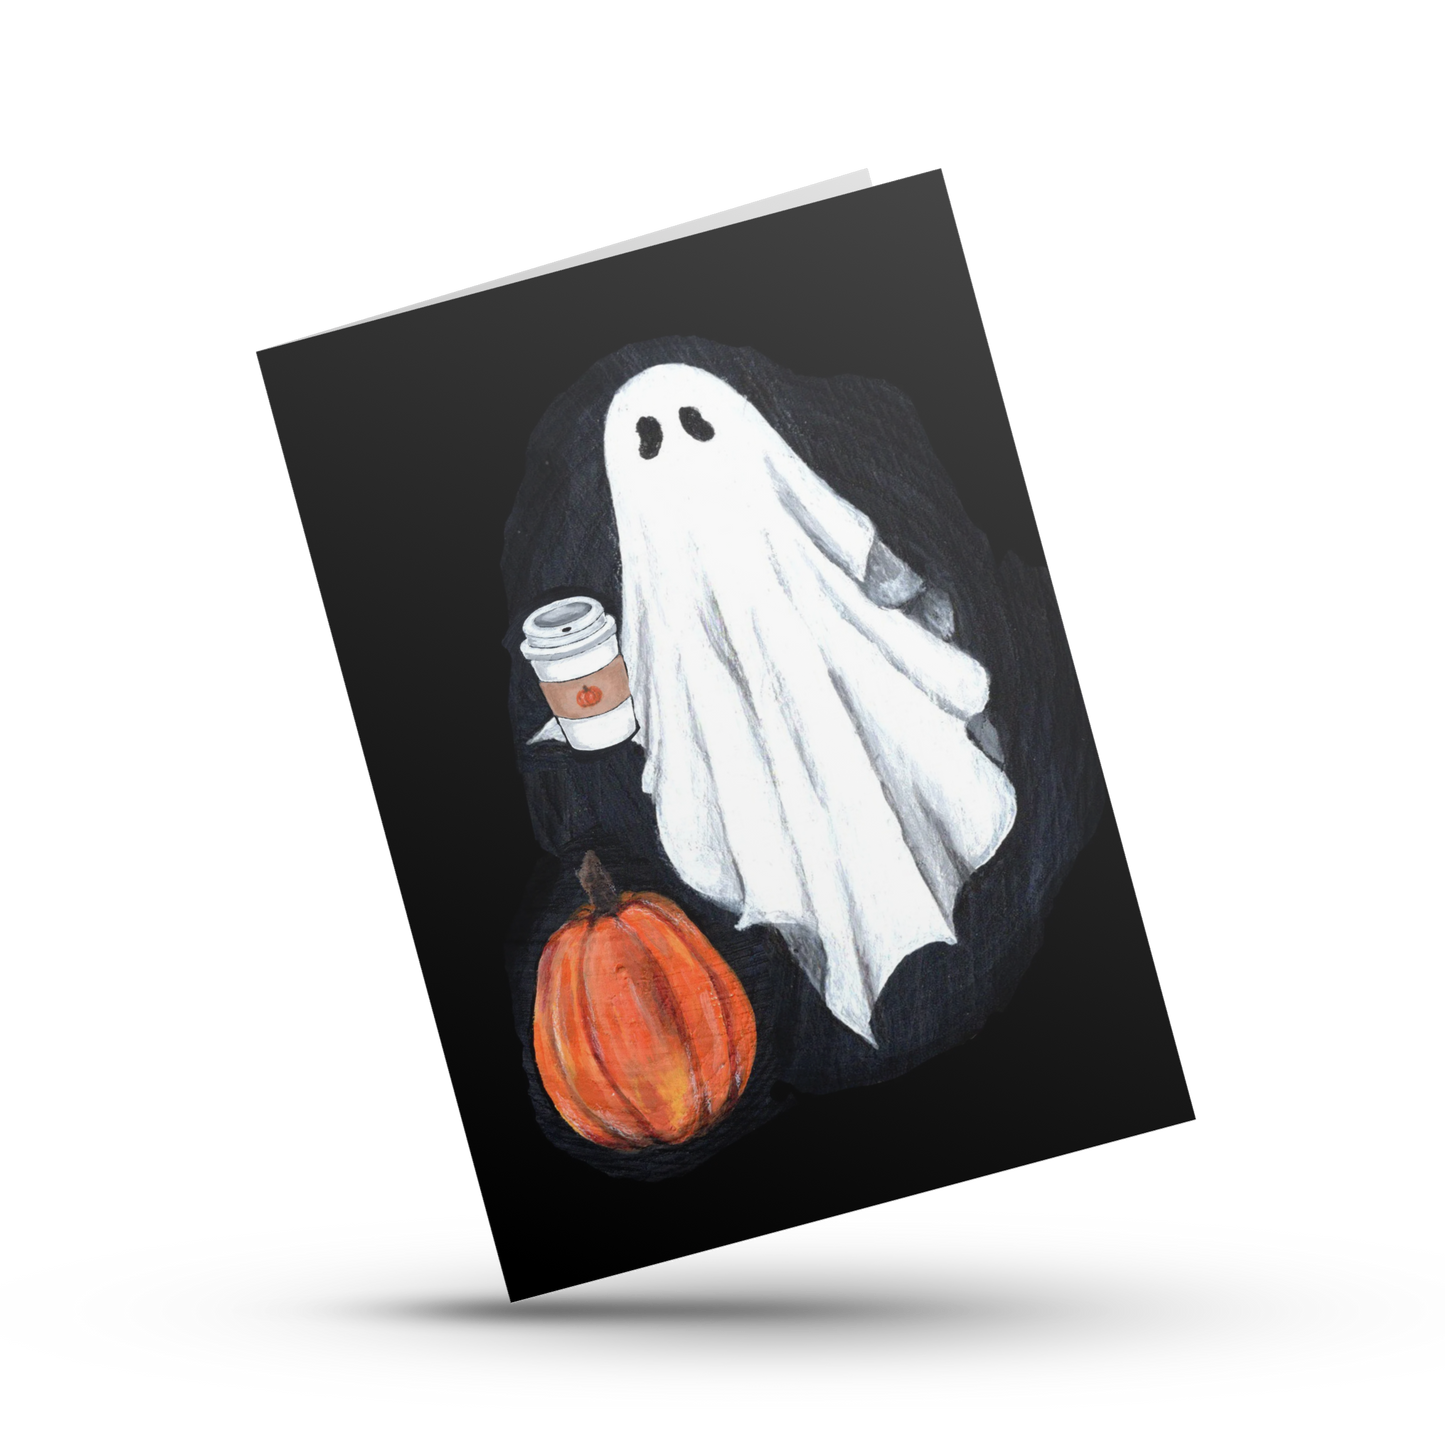 Halloween ghost greeting card, Spooky season card, Cute vintage ghost illustration, Gothic art card for her, Him, Friend, Partner, Mom, Dad